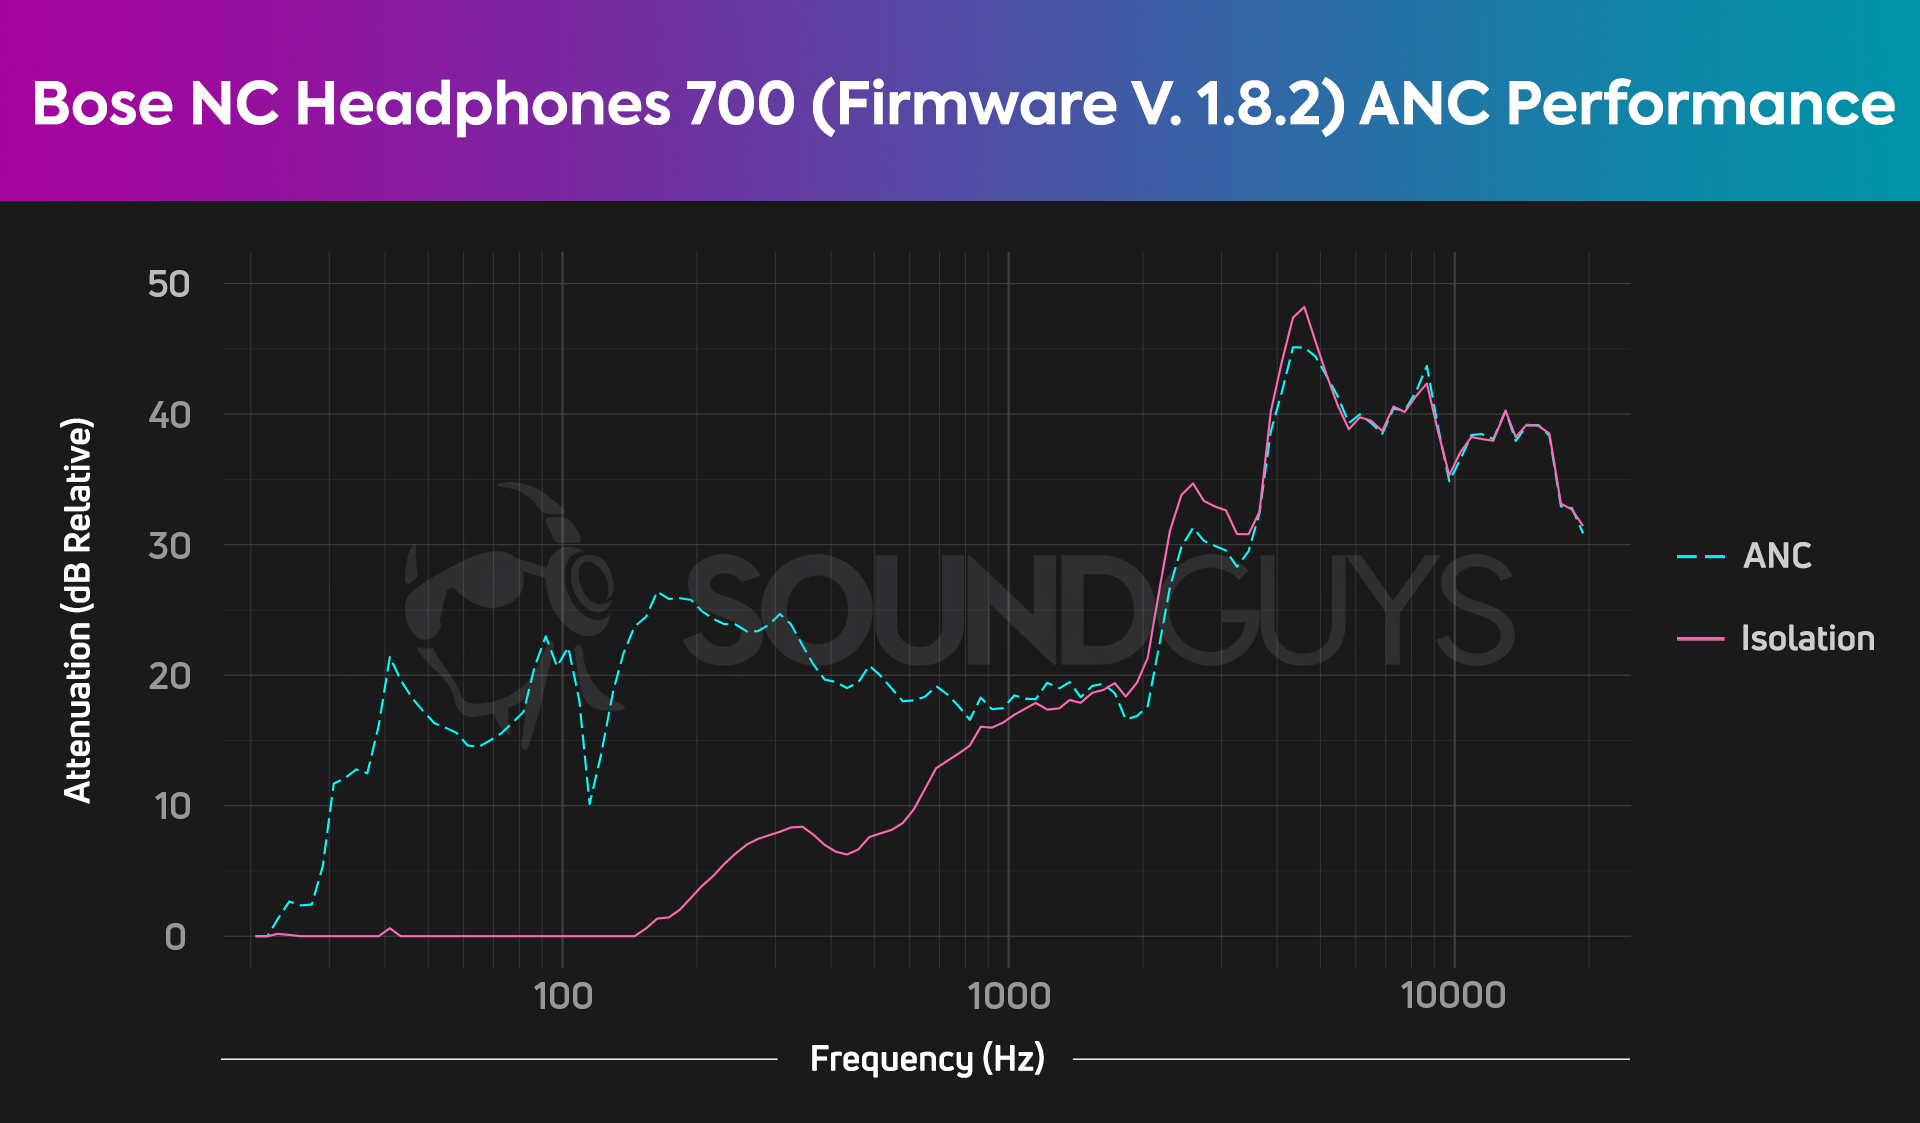 Chart of ANC performance of the Bose Noise Canceling Headphones 700.